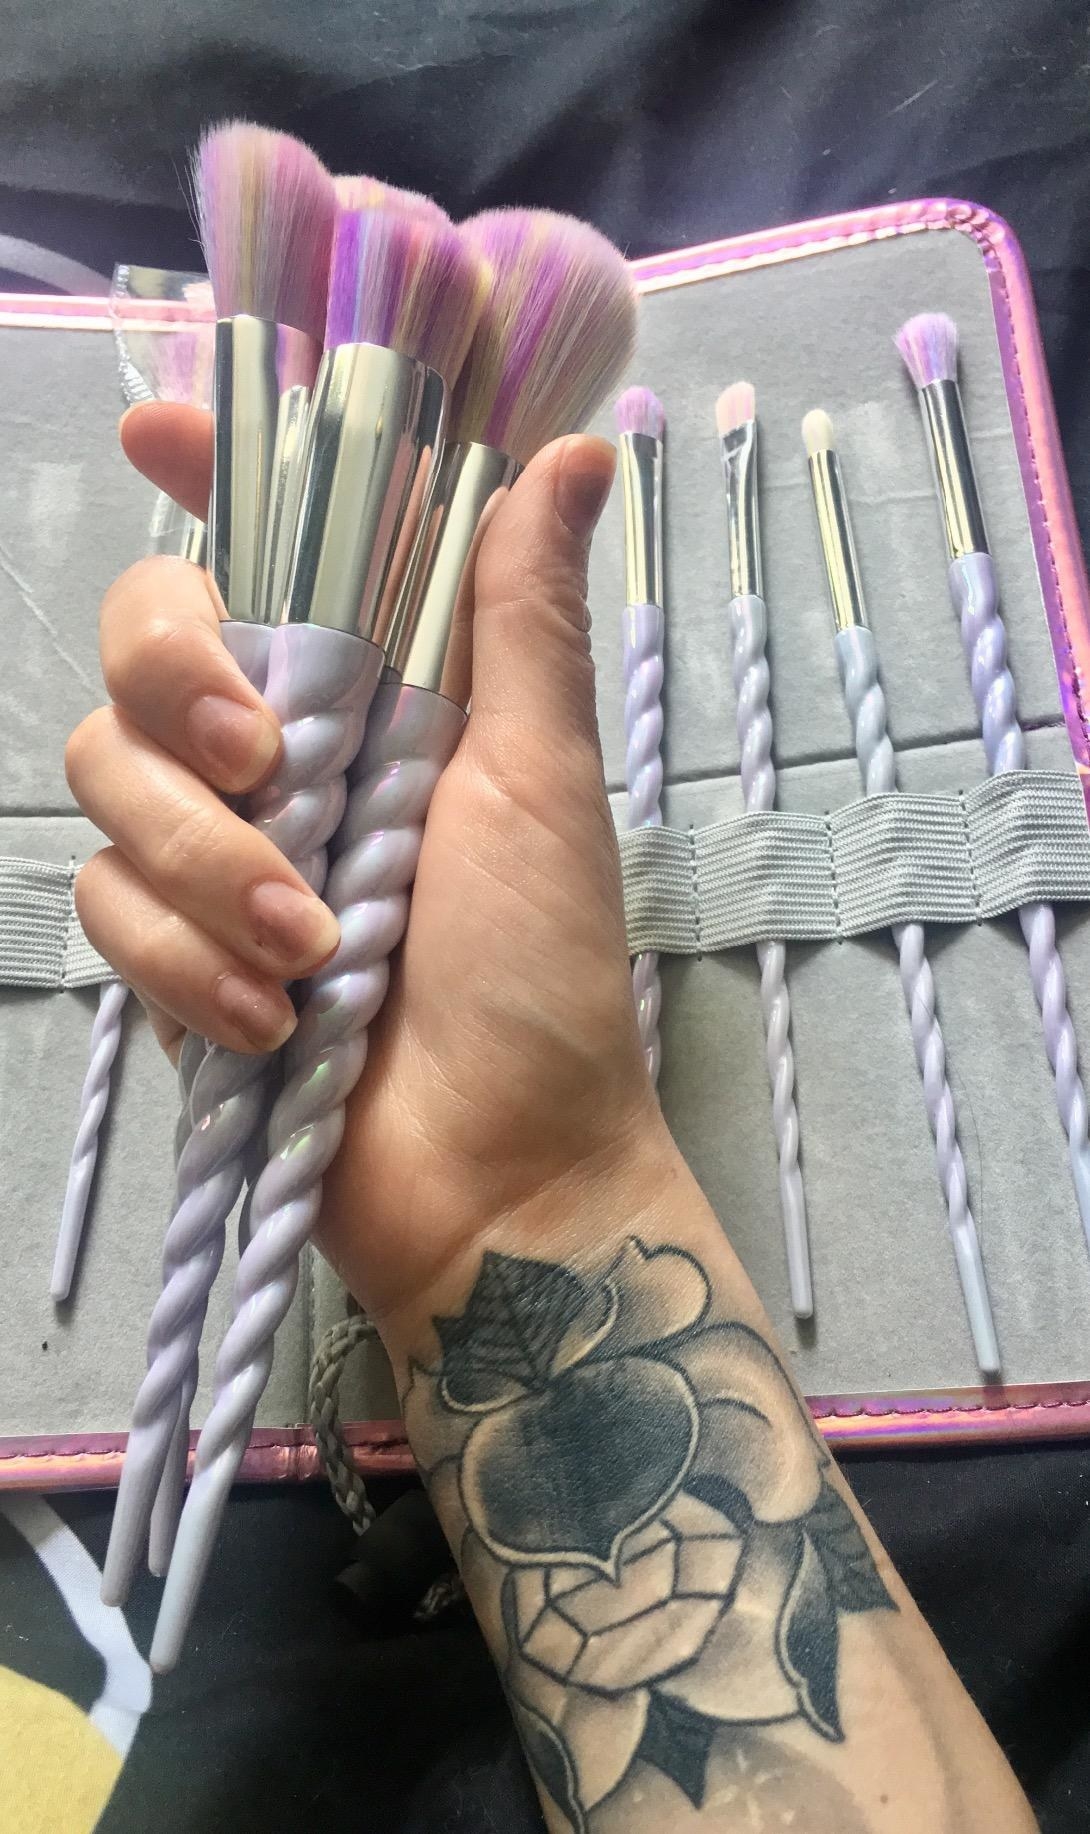 a reviewer shows the set of makeup brushes with purple handles that look like unicorn horns